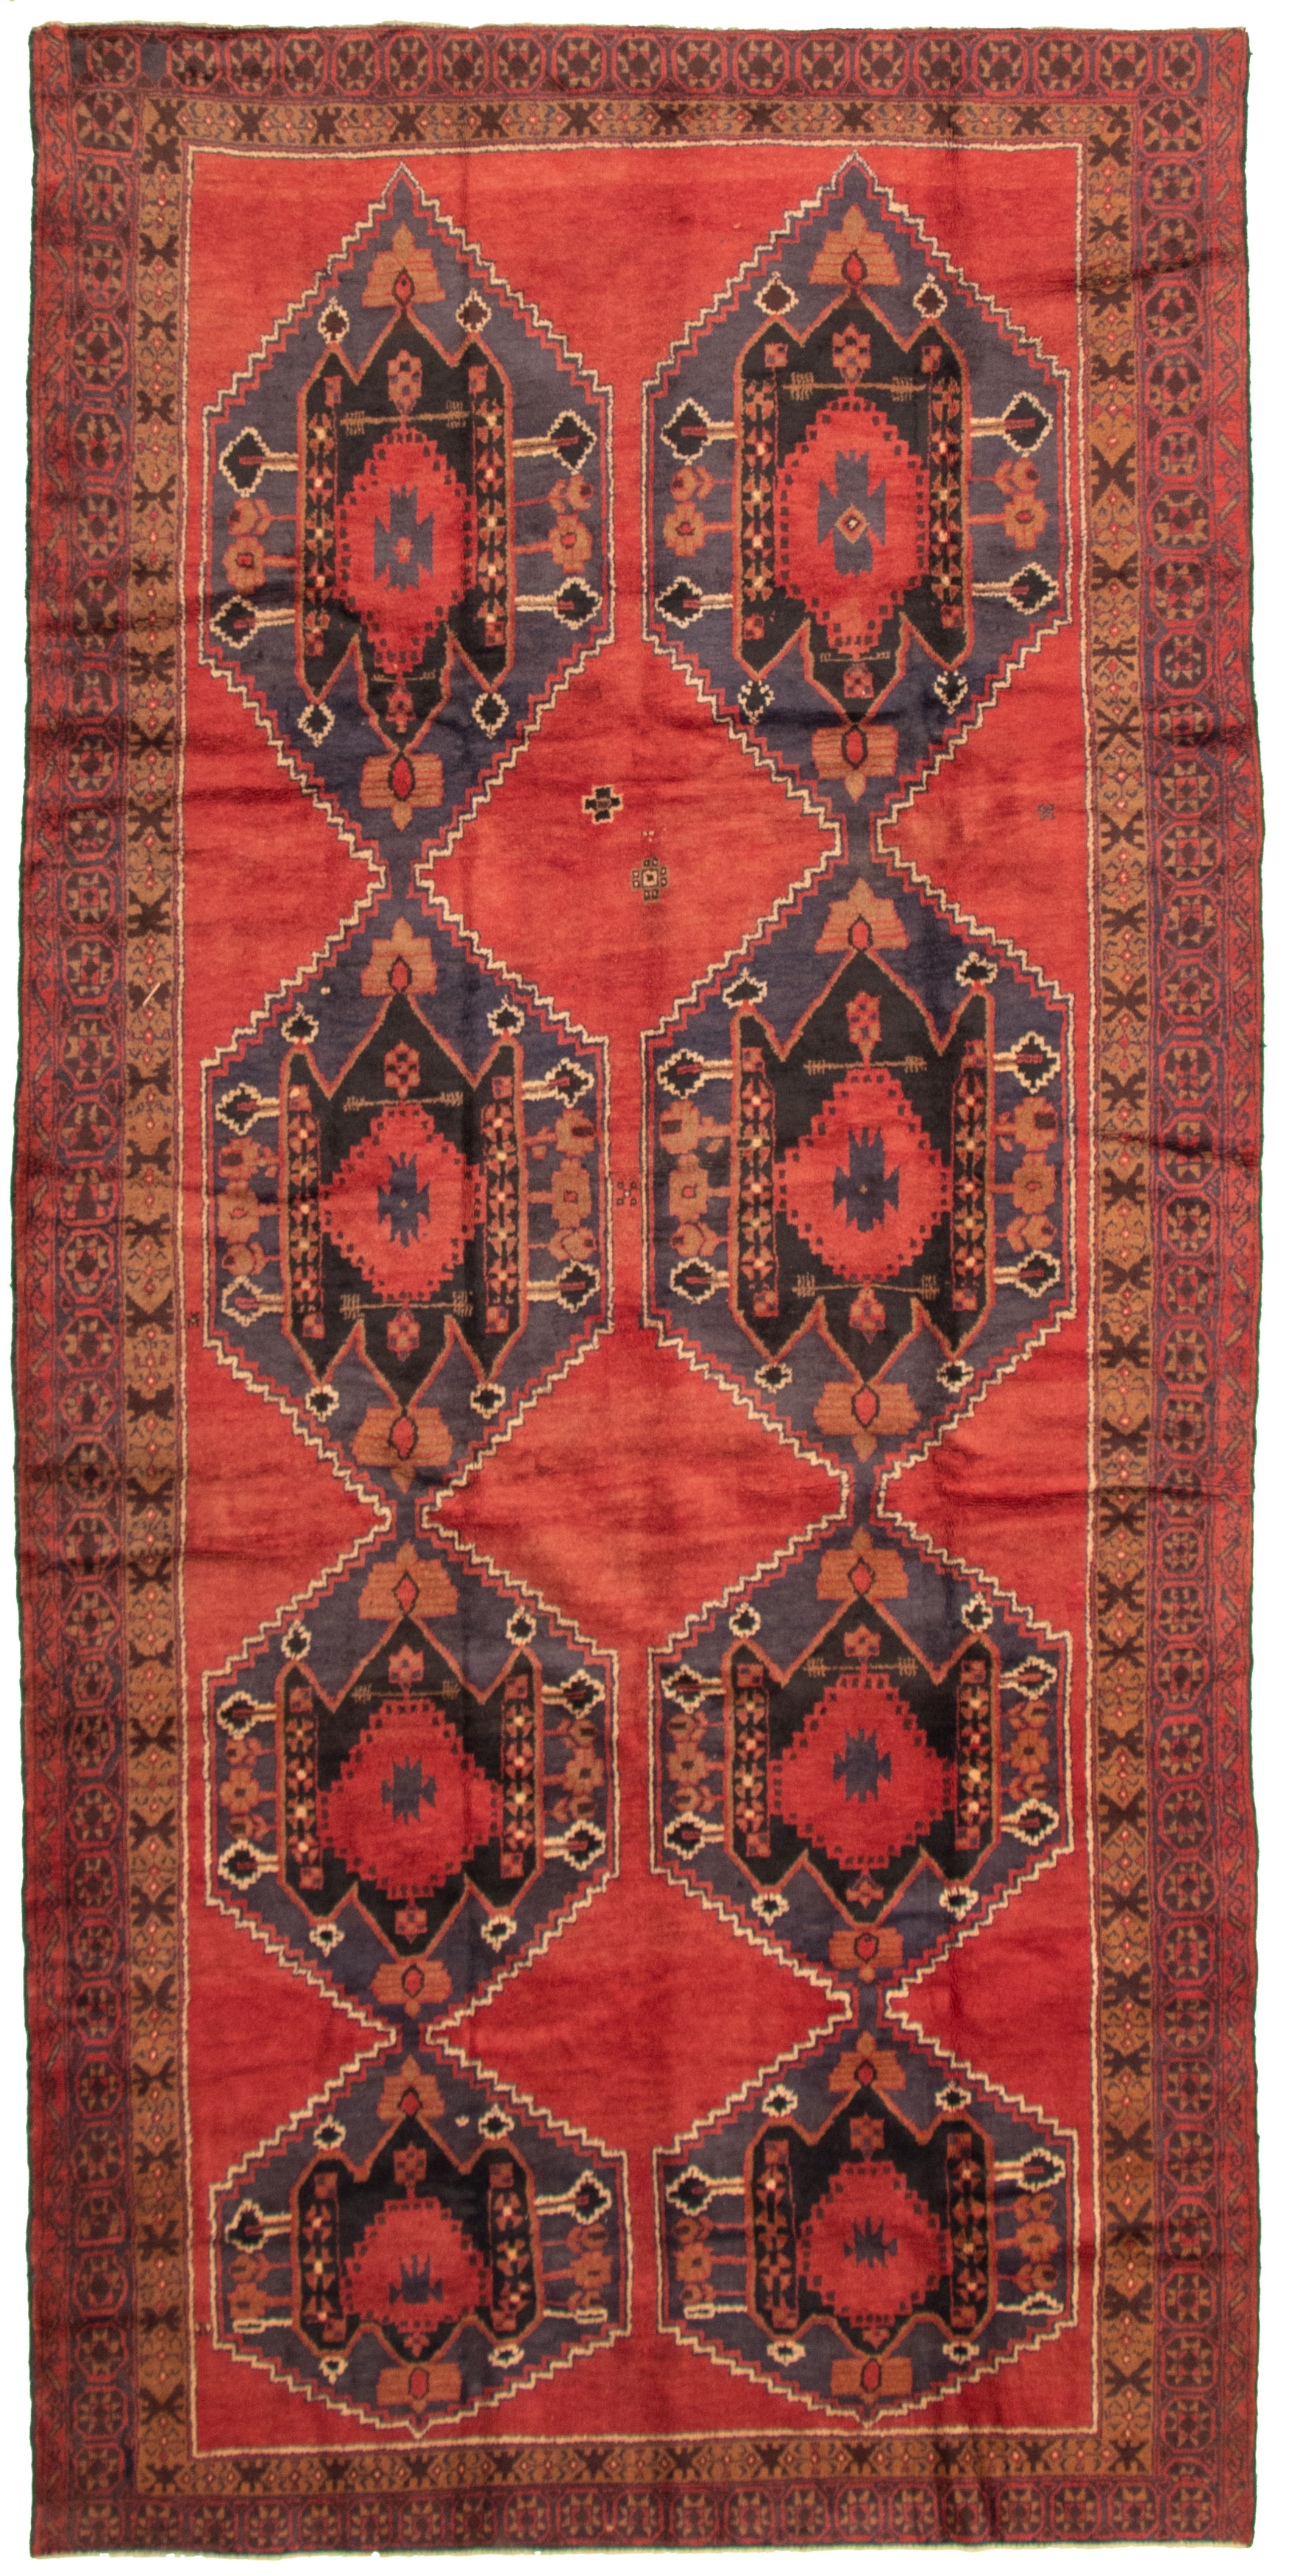 Hand-knotted Teimani Red Wool Rug 5'9" x 11'10" Size: 5'9" x 11'10"  